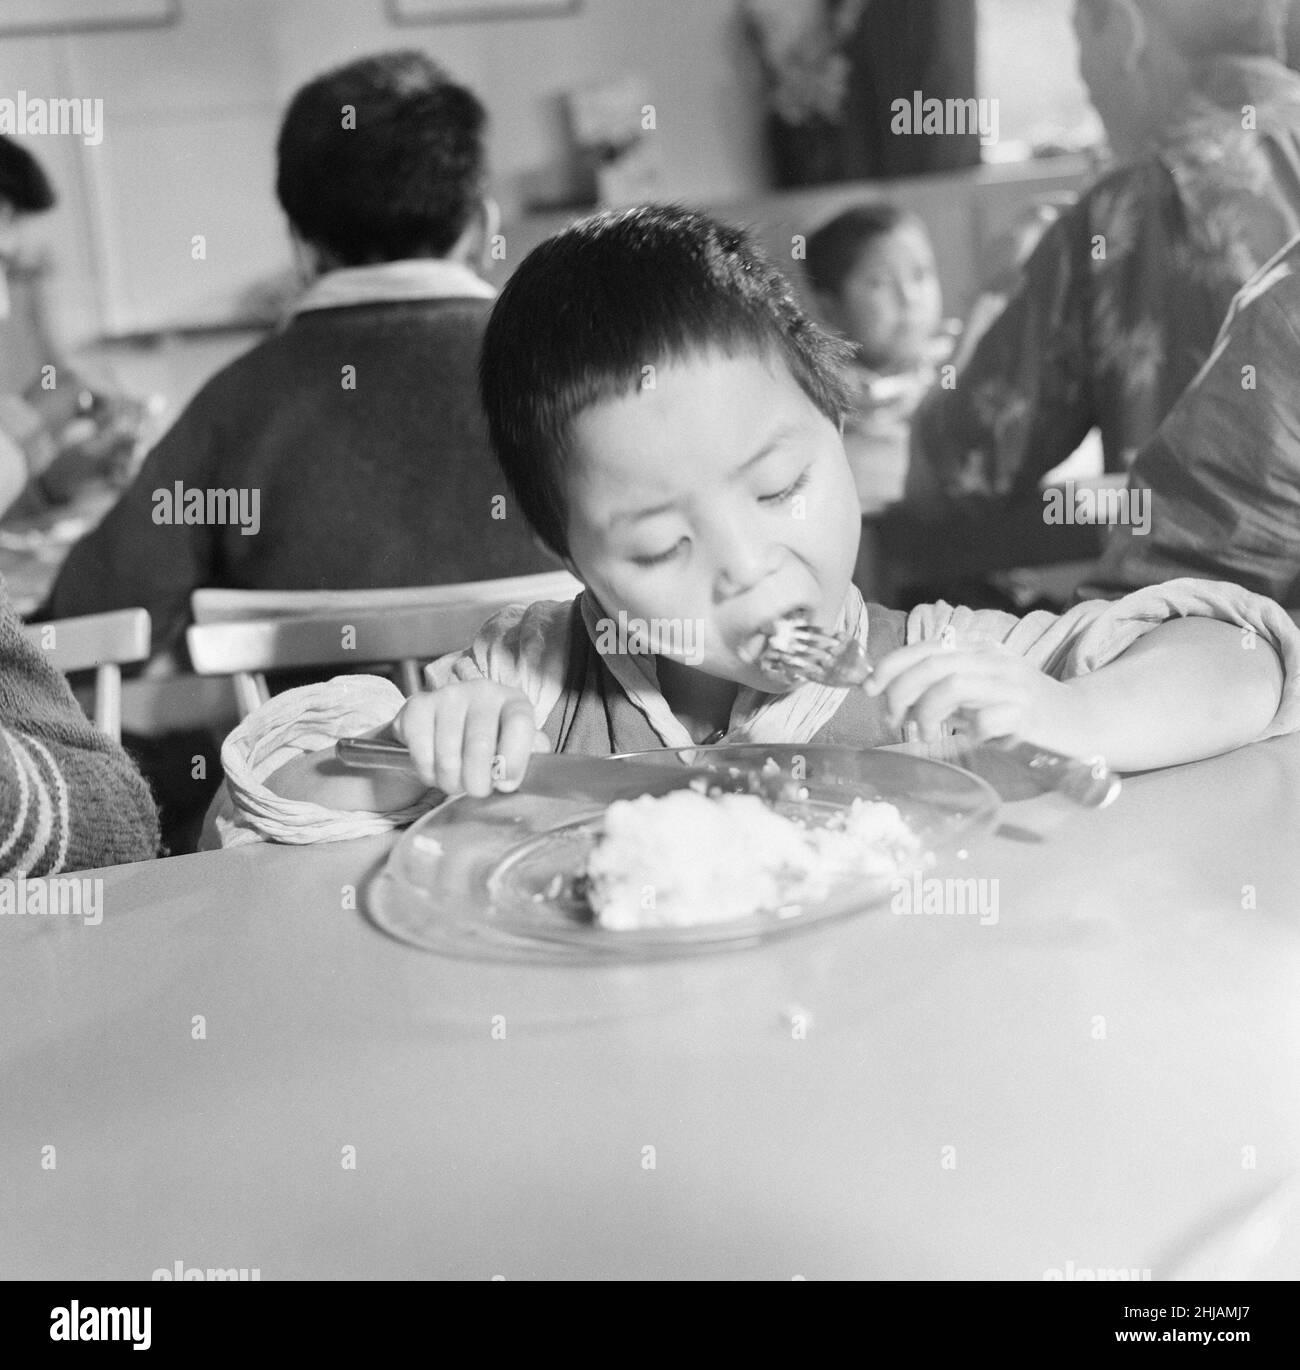 Tibetan Refugee Children at Pestalozzi Village for Children in Sedlescombe, East Sussex, 7th March 1963. Our Picture Shows ... close up of youngest child, Sonam Kiypa, eating lunch.   The thirteen boys and eight girls arrived in the UK, from a refugee camp in northern India. Many now orphaned, the children have fled chinese occupation and persecution.   The community is named after eighteenth century Swiss educationalist, Johann Heinrich Pestalozzi, who devoted his life to closing divisions in society through education of the whole person, their Head, Heart and Hands. Stock Photo